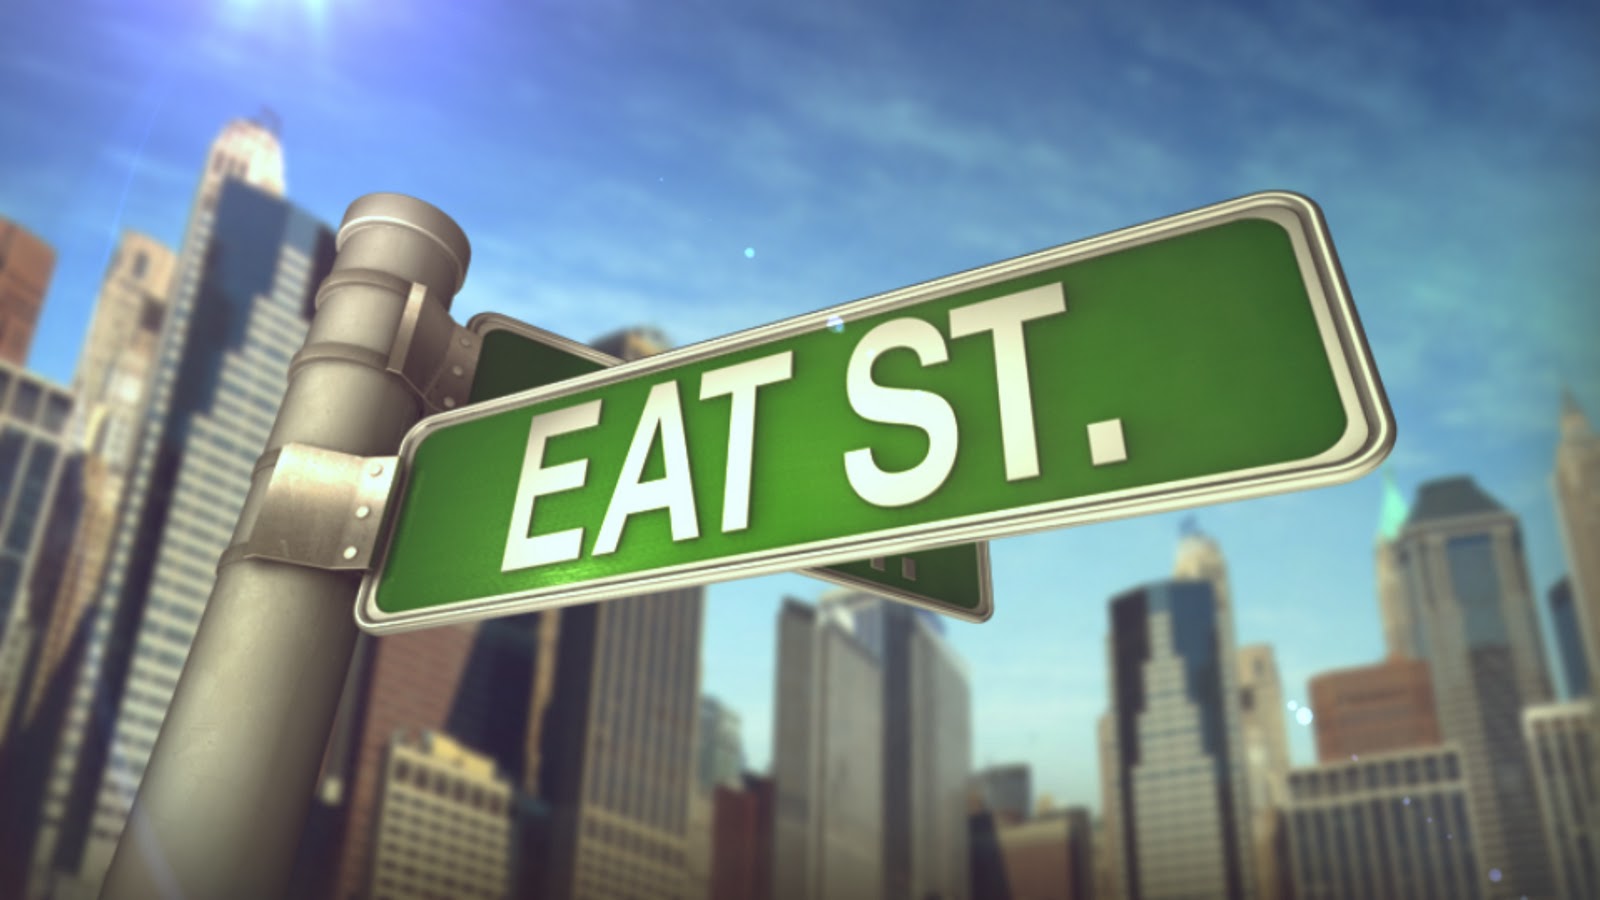 Orlando's Food Trucks: Eat St. has changed the dates for their Eat St